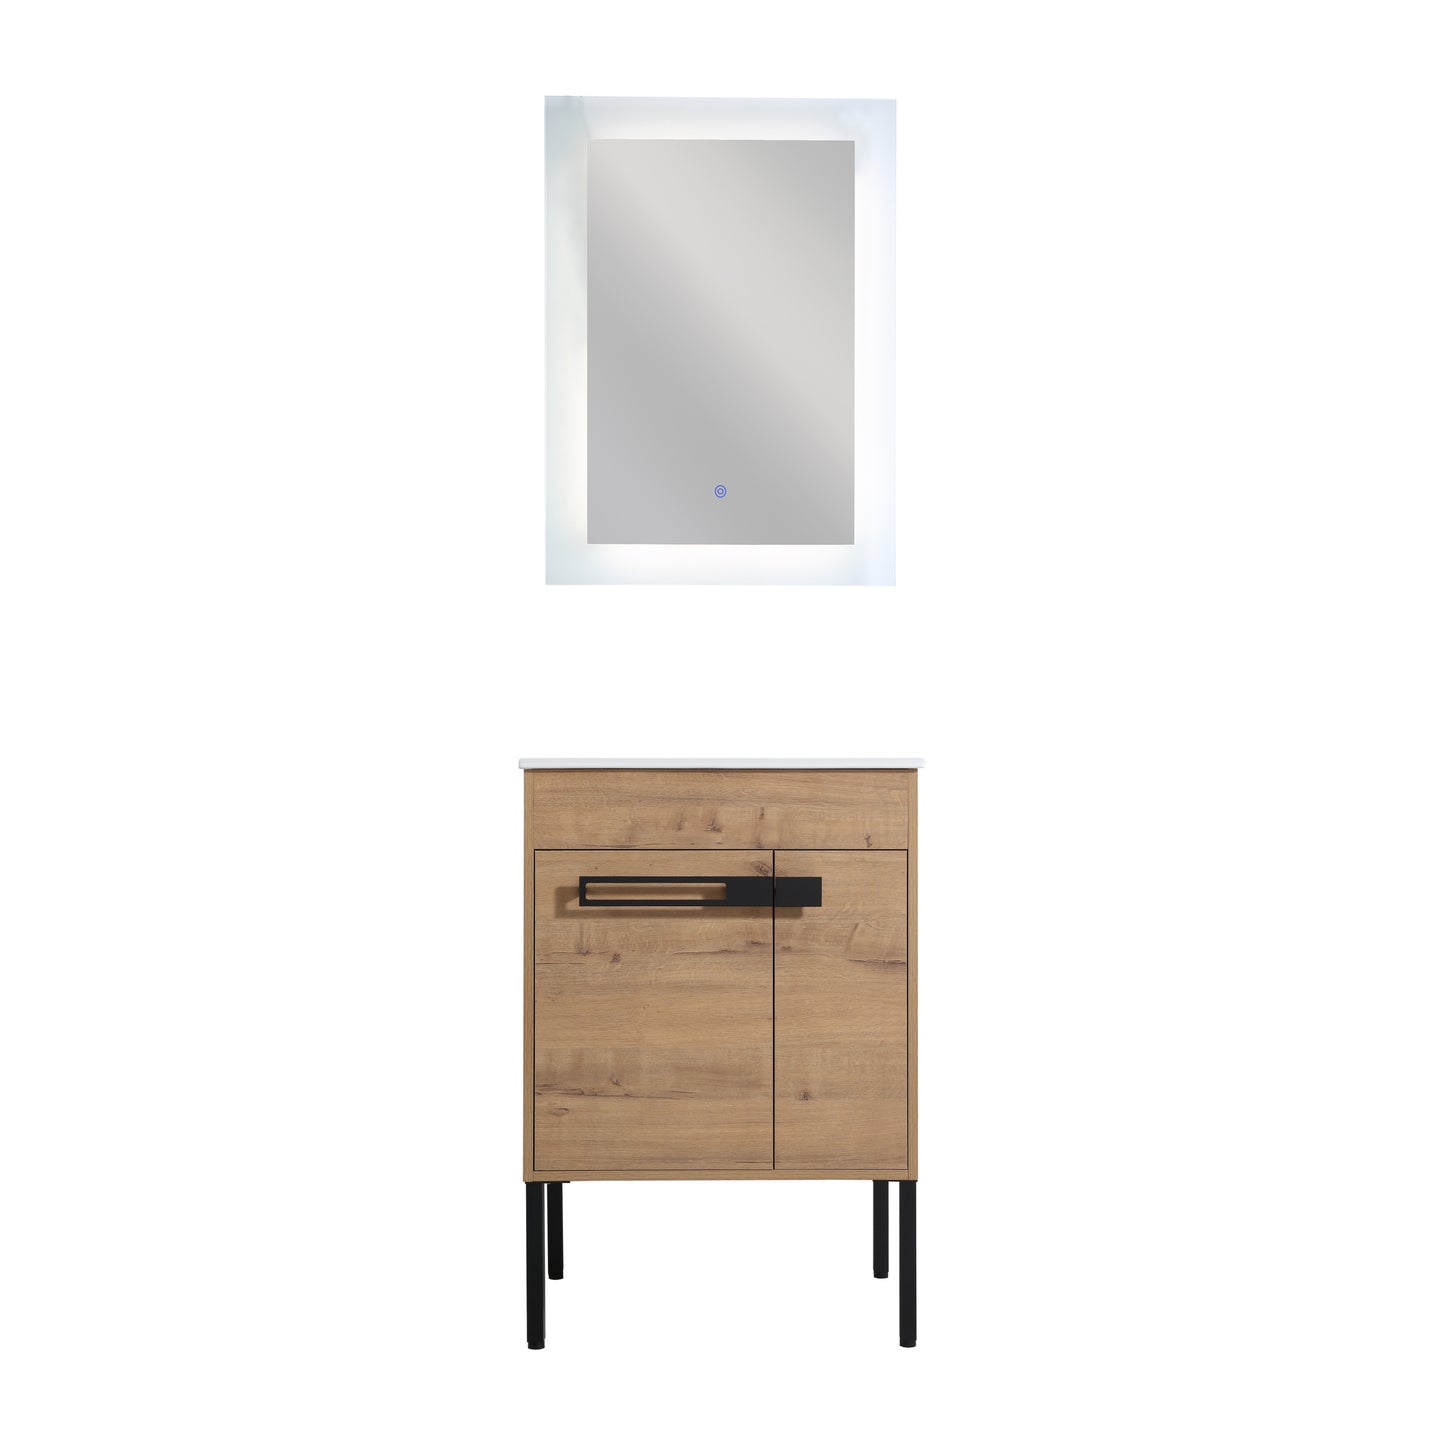 Bathroom Vanity with Sink 24 Inch, with Soft Close Doors, 24x18